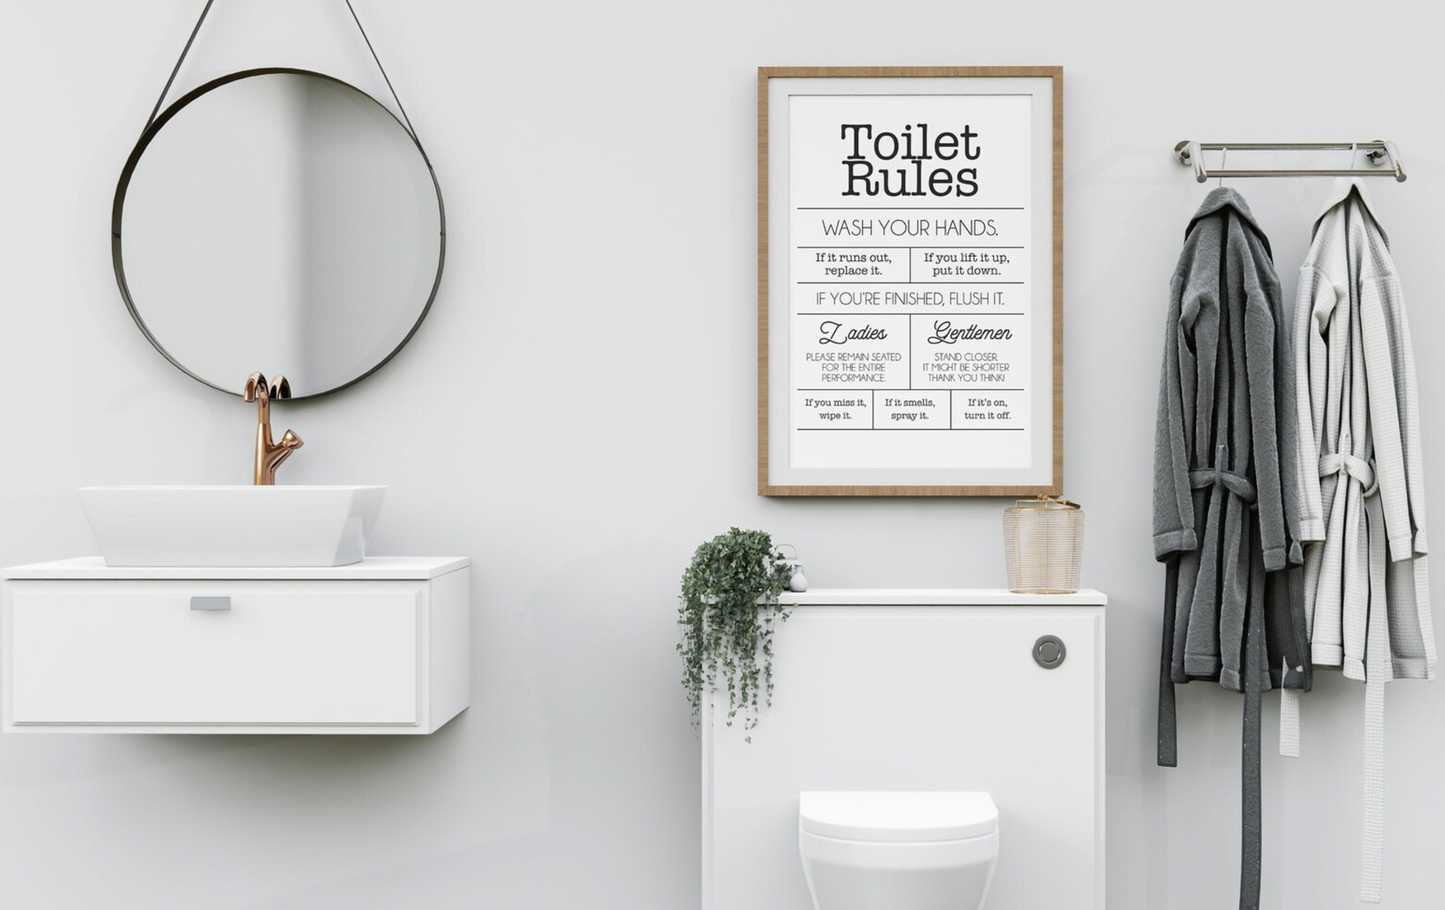 Toilet Rules| Funny Bathroom Poster | Digital Artwork | Digital Poster | Print At Home Poster | Wall Decor | Funny Gift